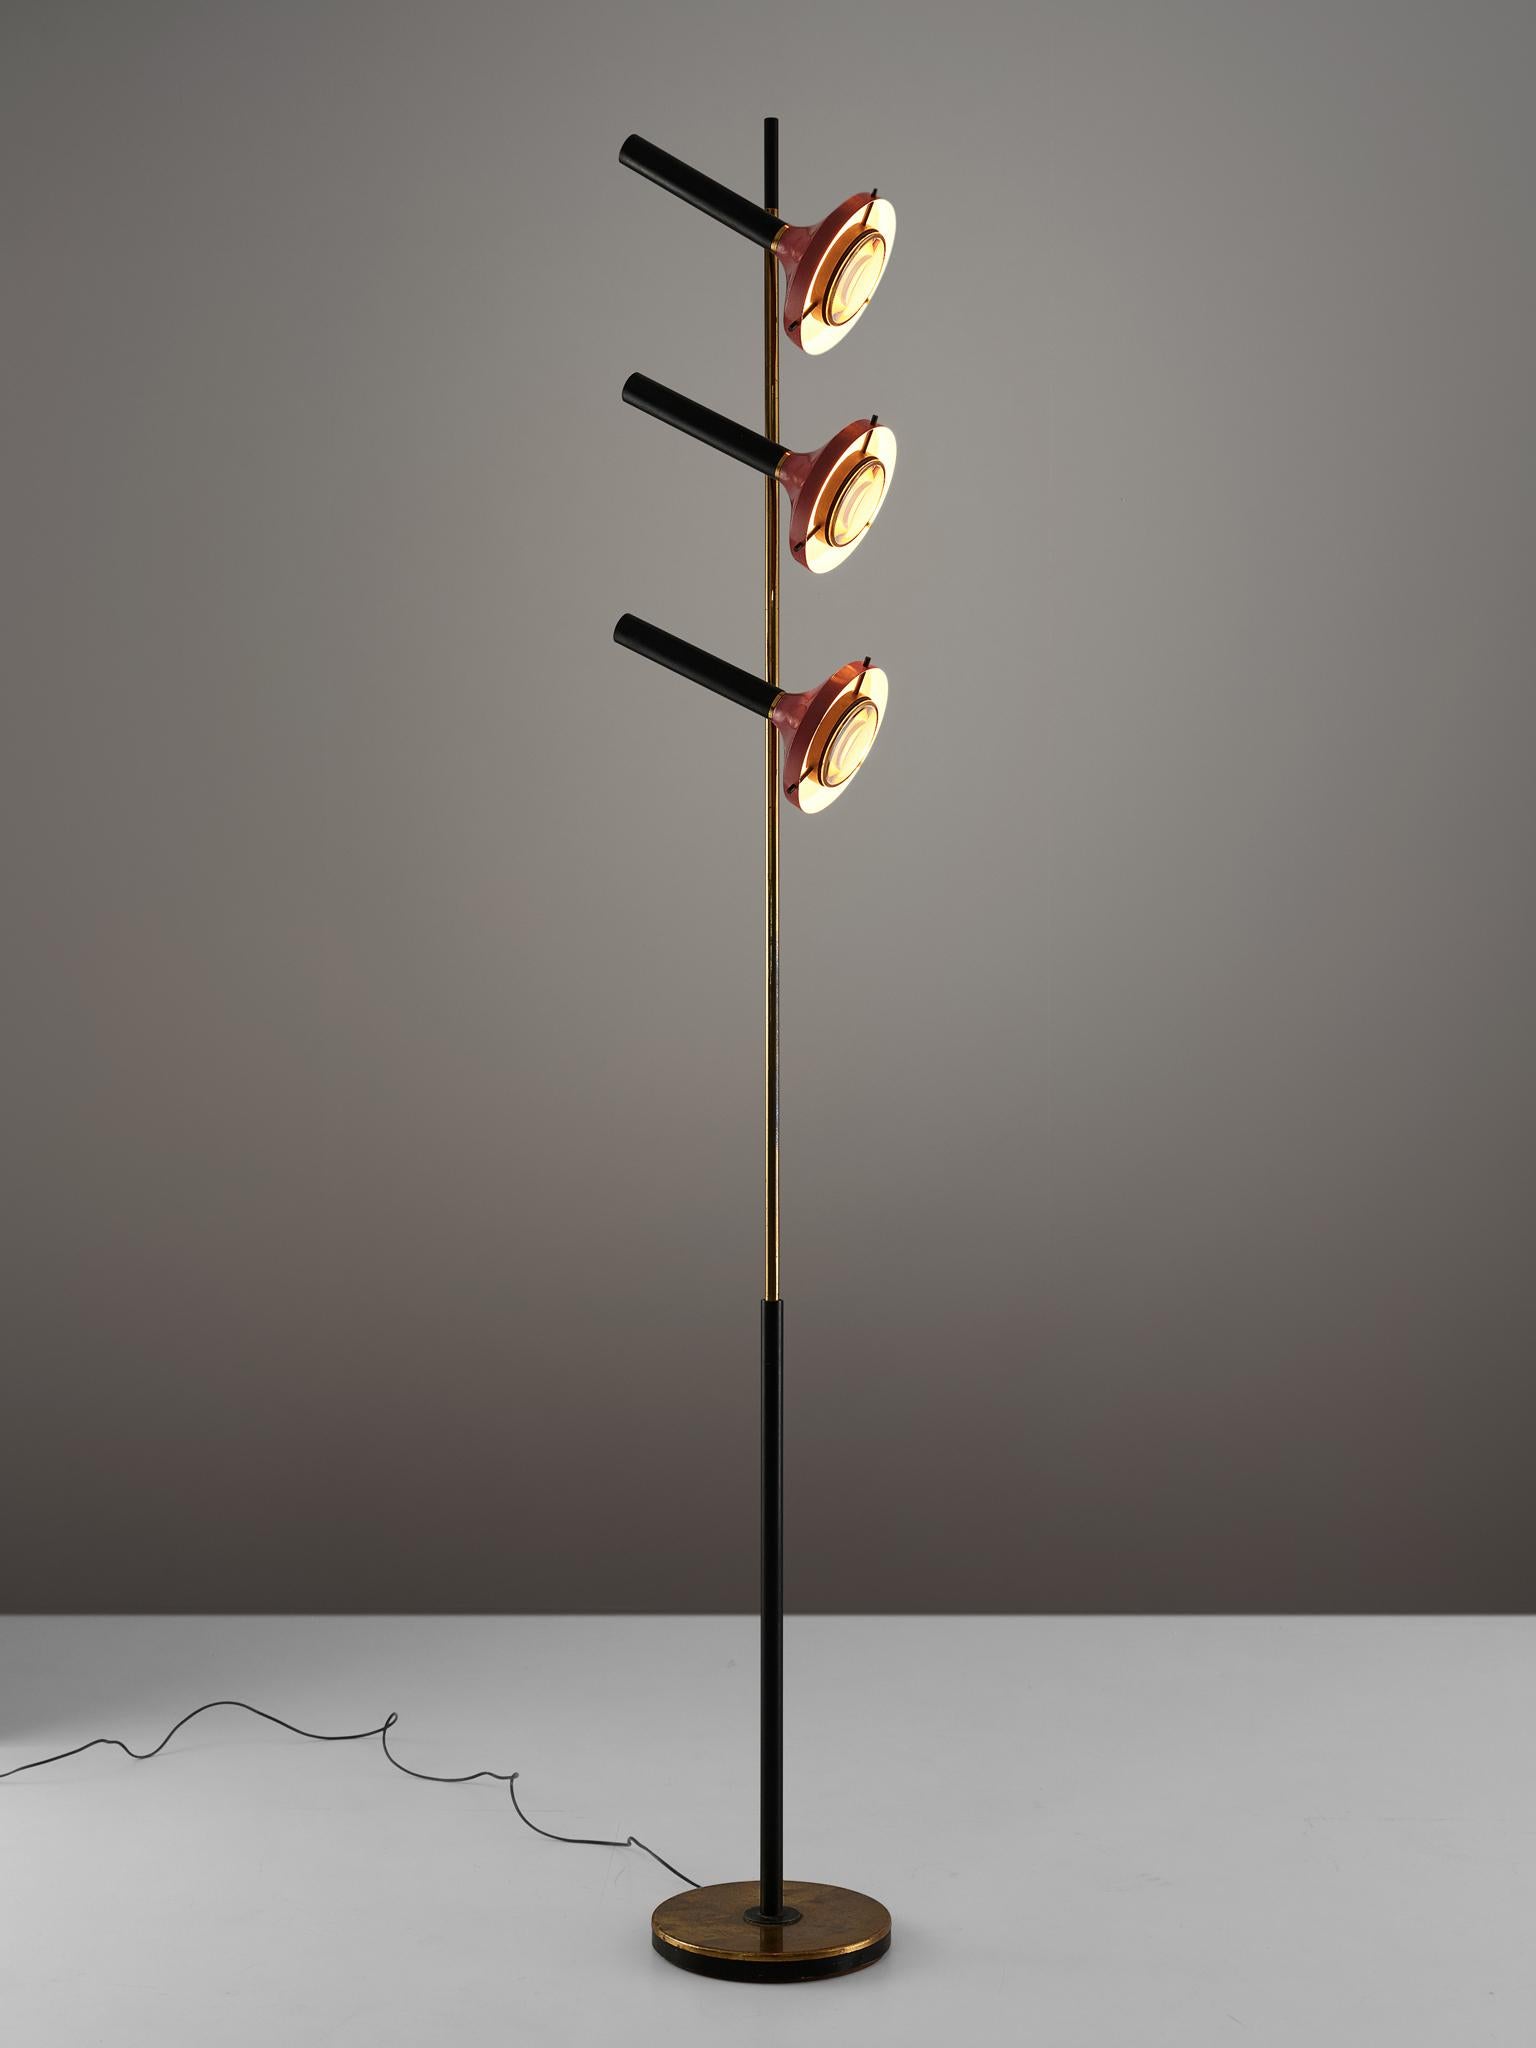 Oscar Torlasco, floor lamp, metal and brass, Italy, 1950s.

Refined floor light with three shades by Italian designer Oscar Torlasco. The lamp consist of a round base in beautiful patinated brass. The stern is from brass with a black base. The three